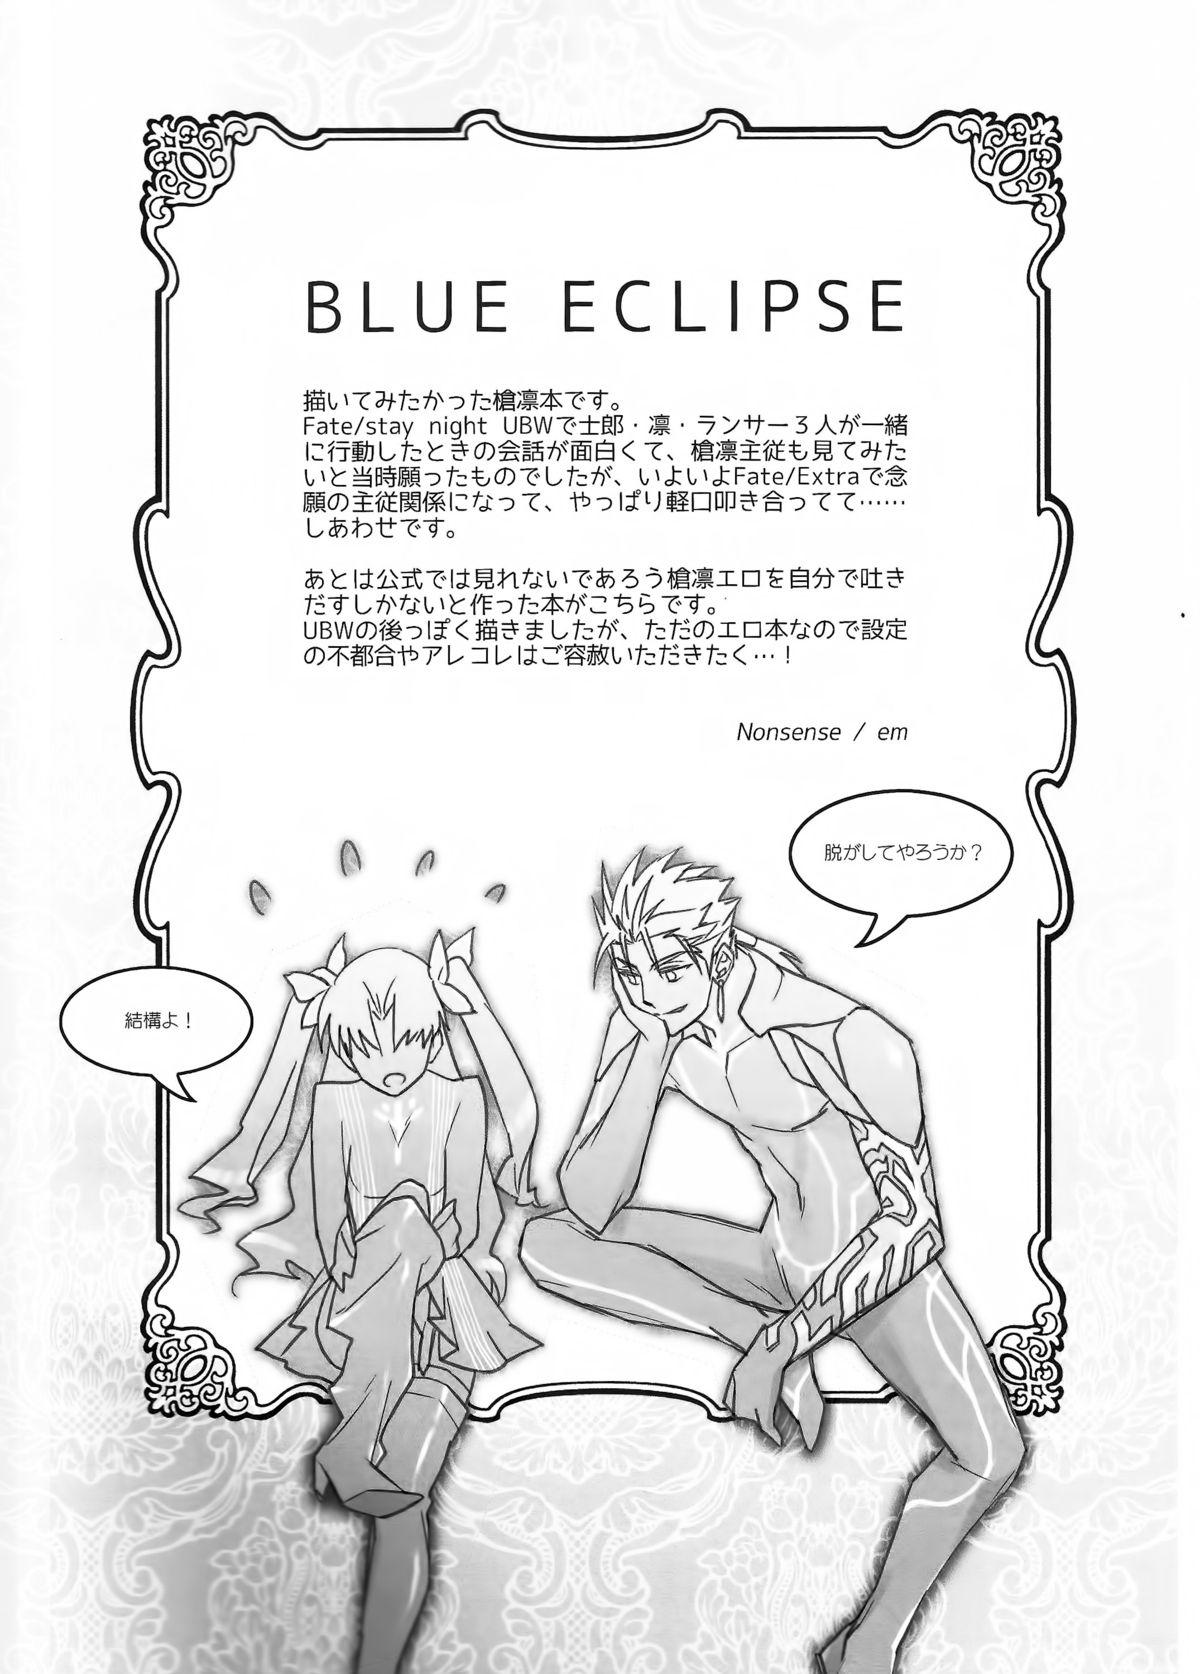 Nudity BLUE ECLIPSE - Fate stay night Belly - Page 2